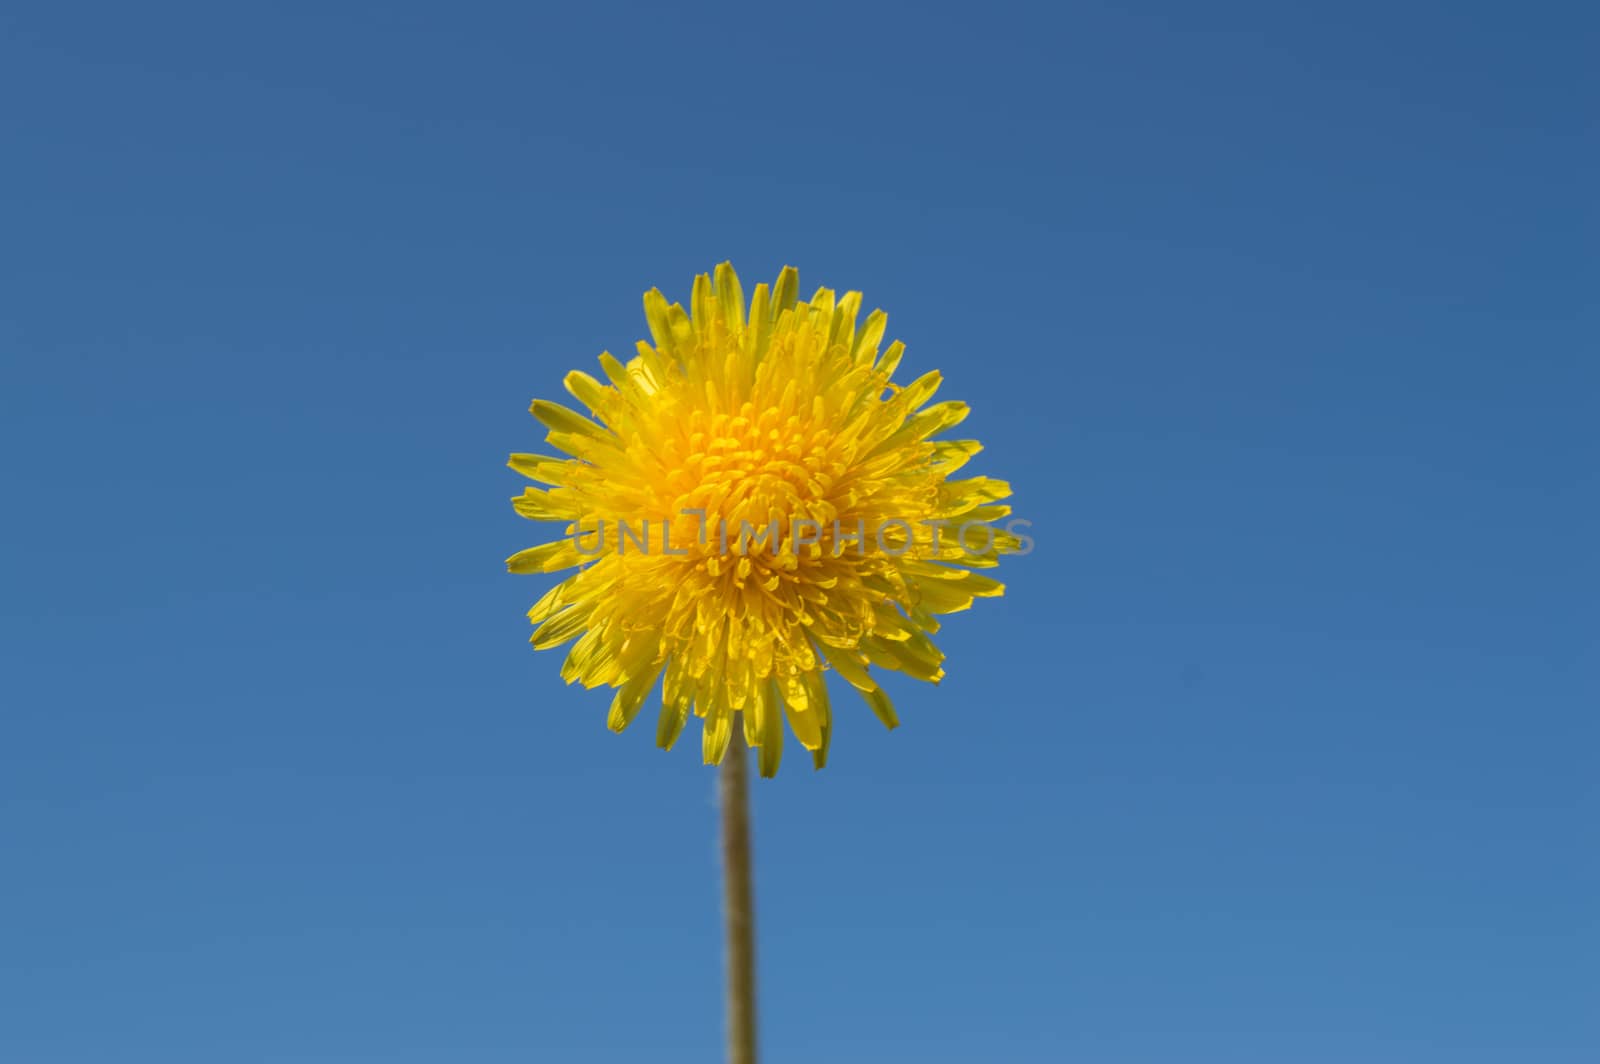 Yellow dandelion on blue sky background by claire_lucia